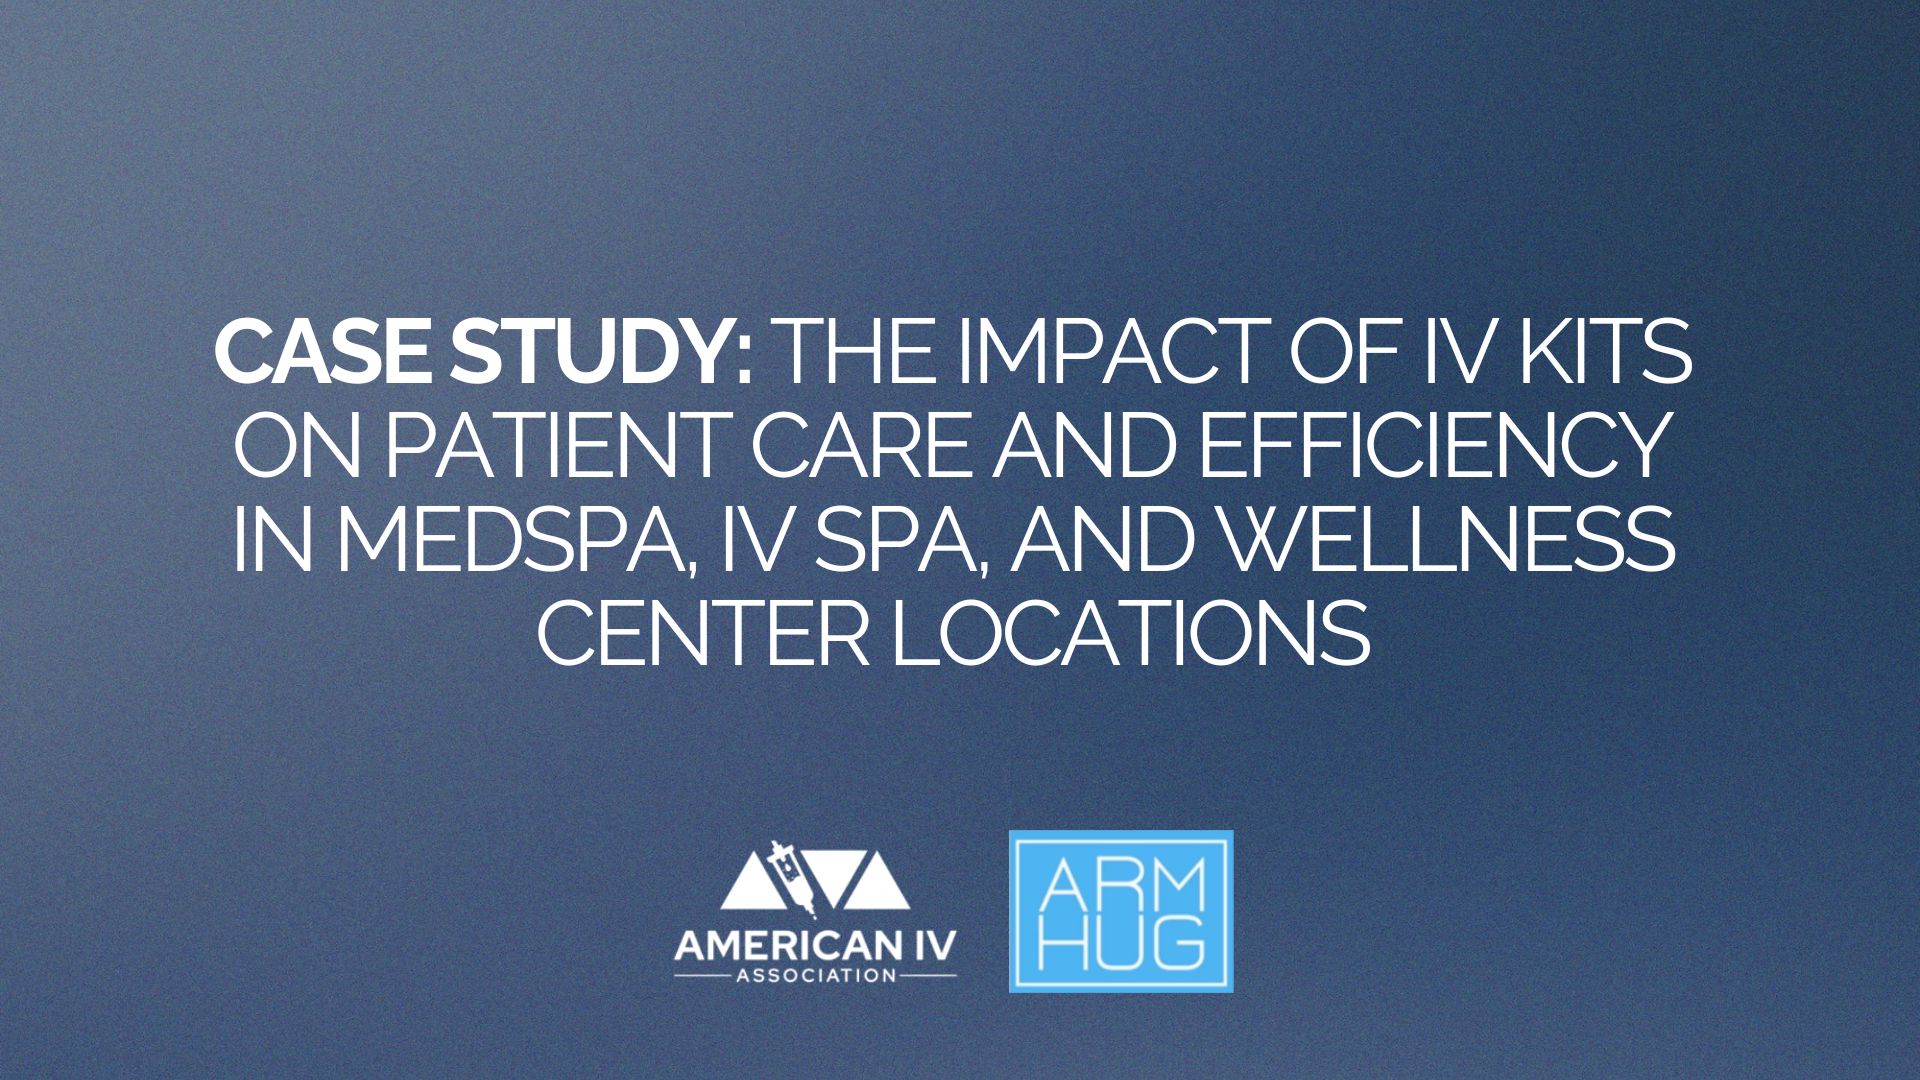 Case Study: The Impact of IV Kits on Patient Care and Efficiency in MedSpa, IV SPA, and Wellness Center Locations